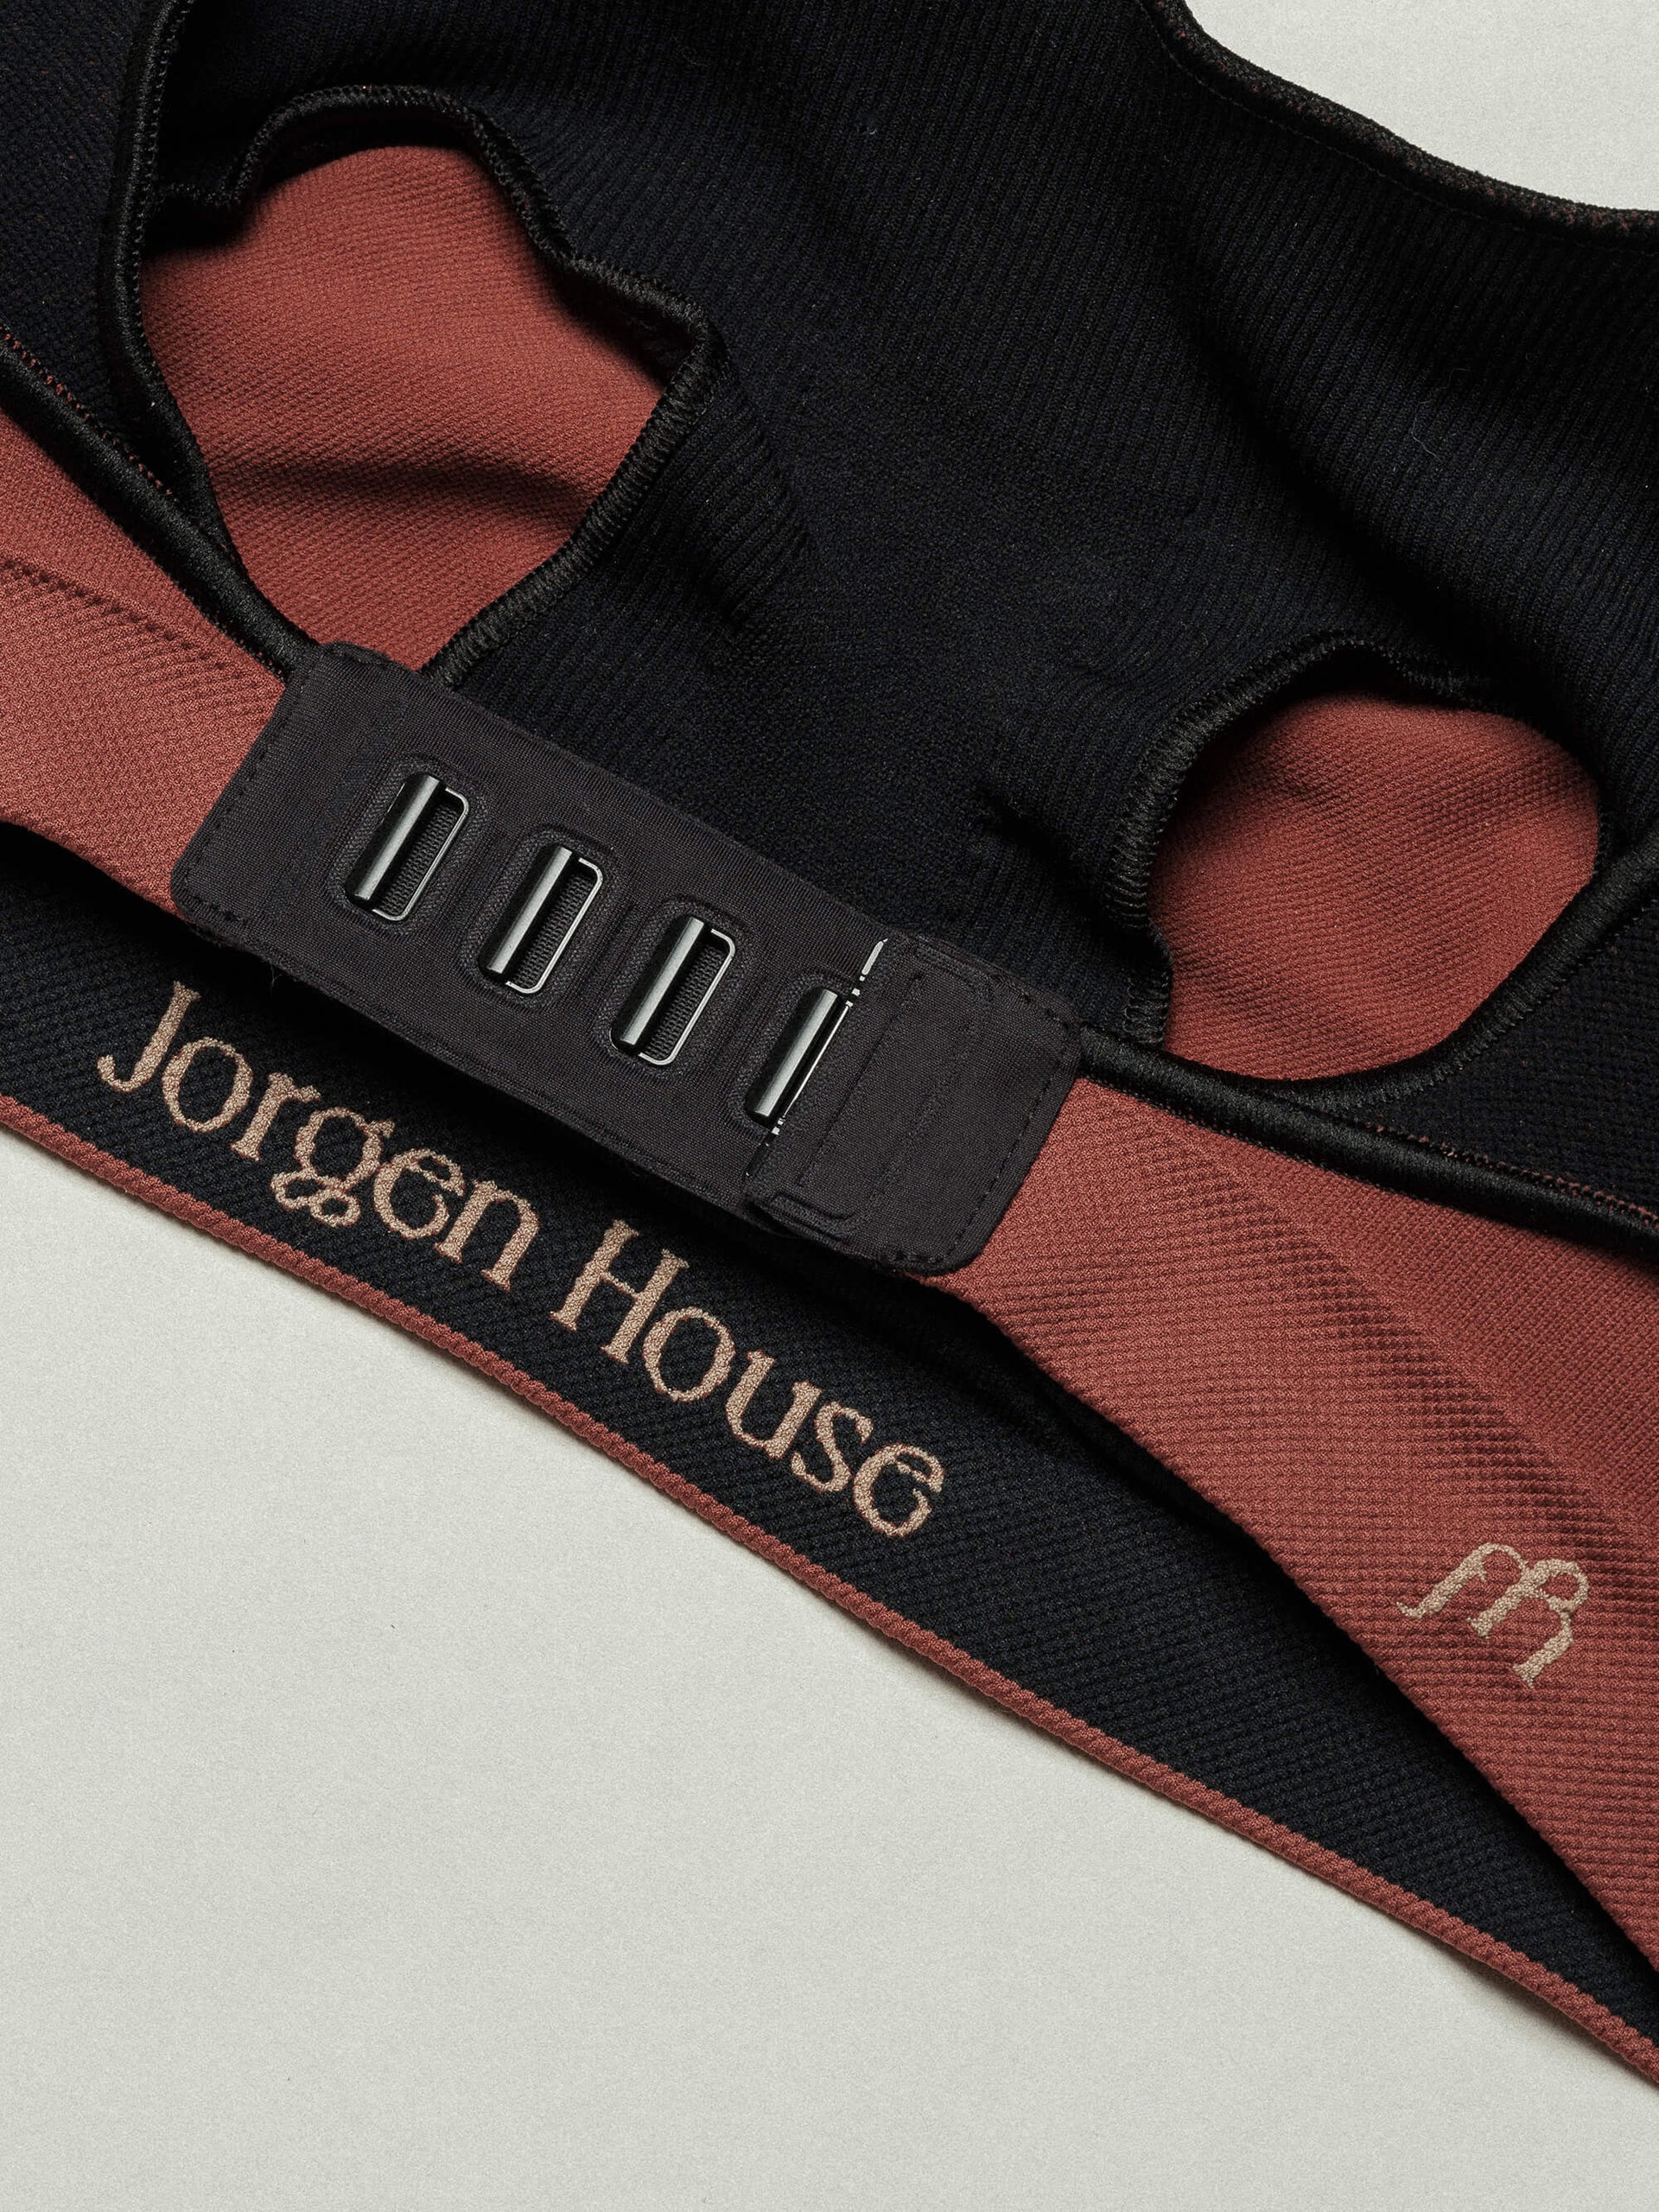 Jorgen House close up image of the brick red maternity breastfeeding bra back clasps